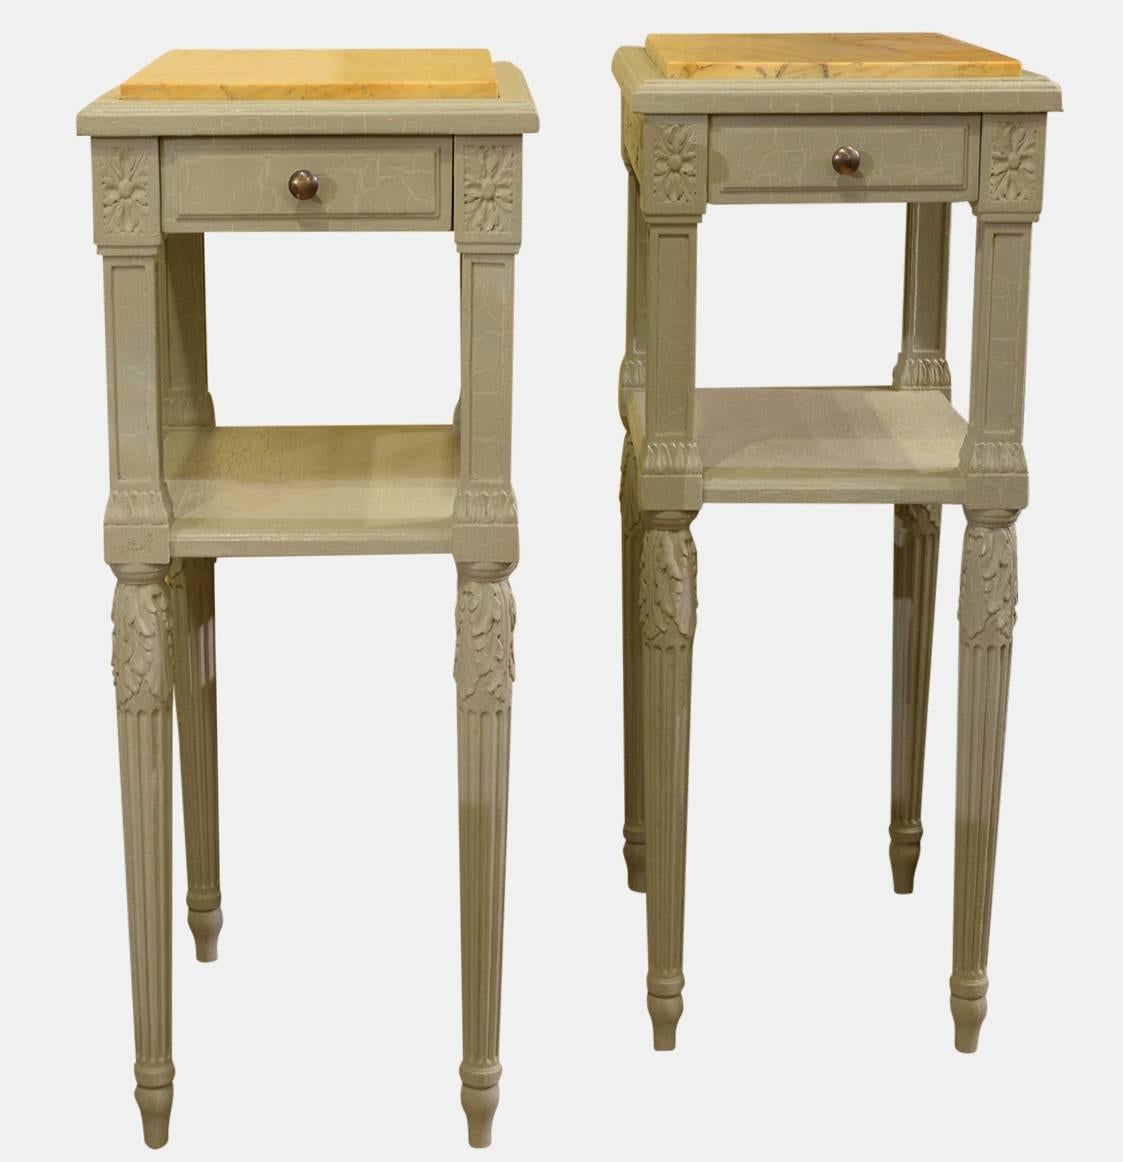 A pair of French Louis VXI style painted nightstands with sienna marble tops. Single drawer and shelf below,

circa 1900.